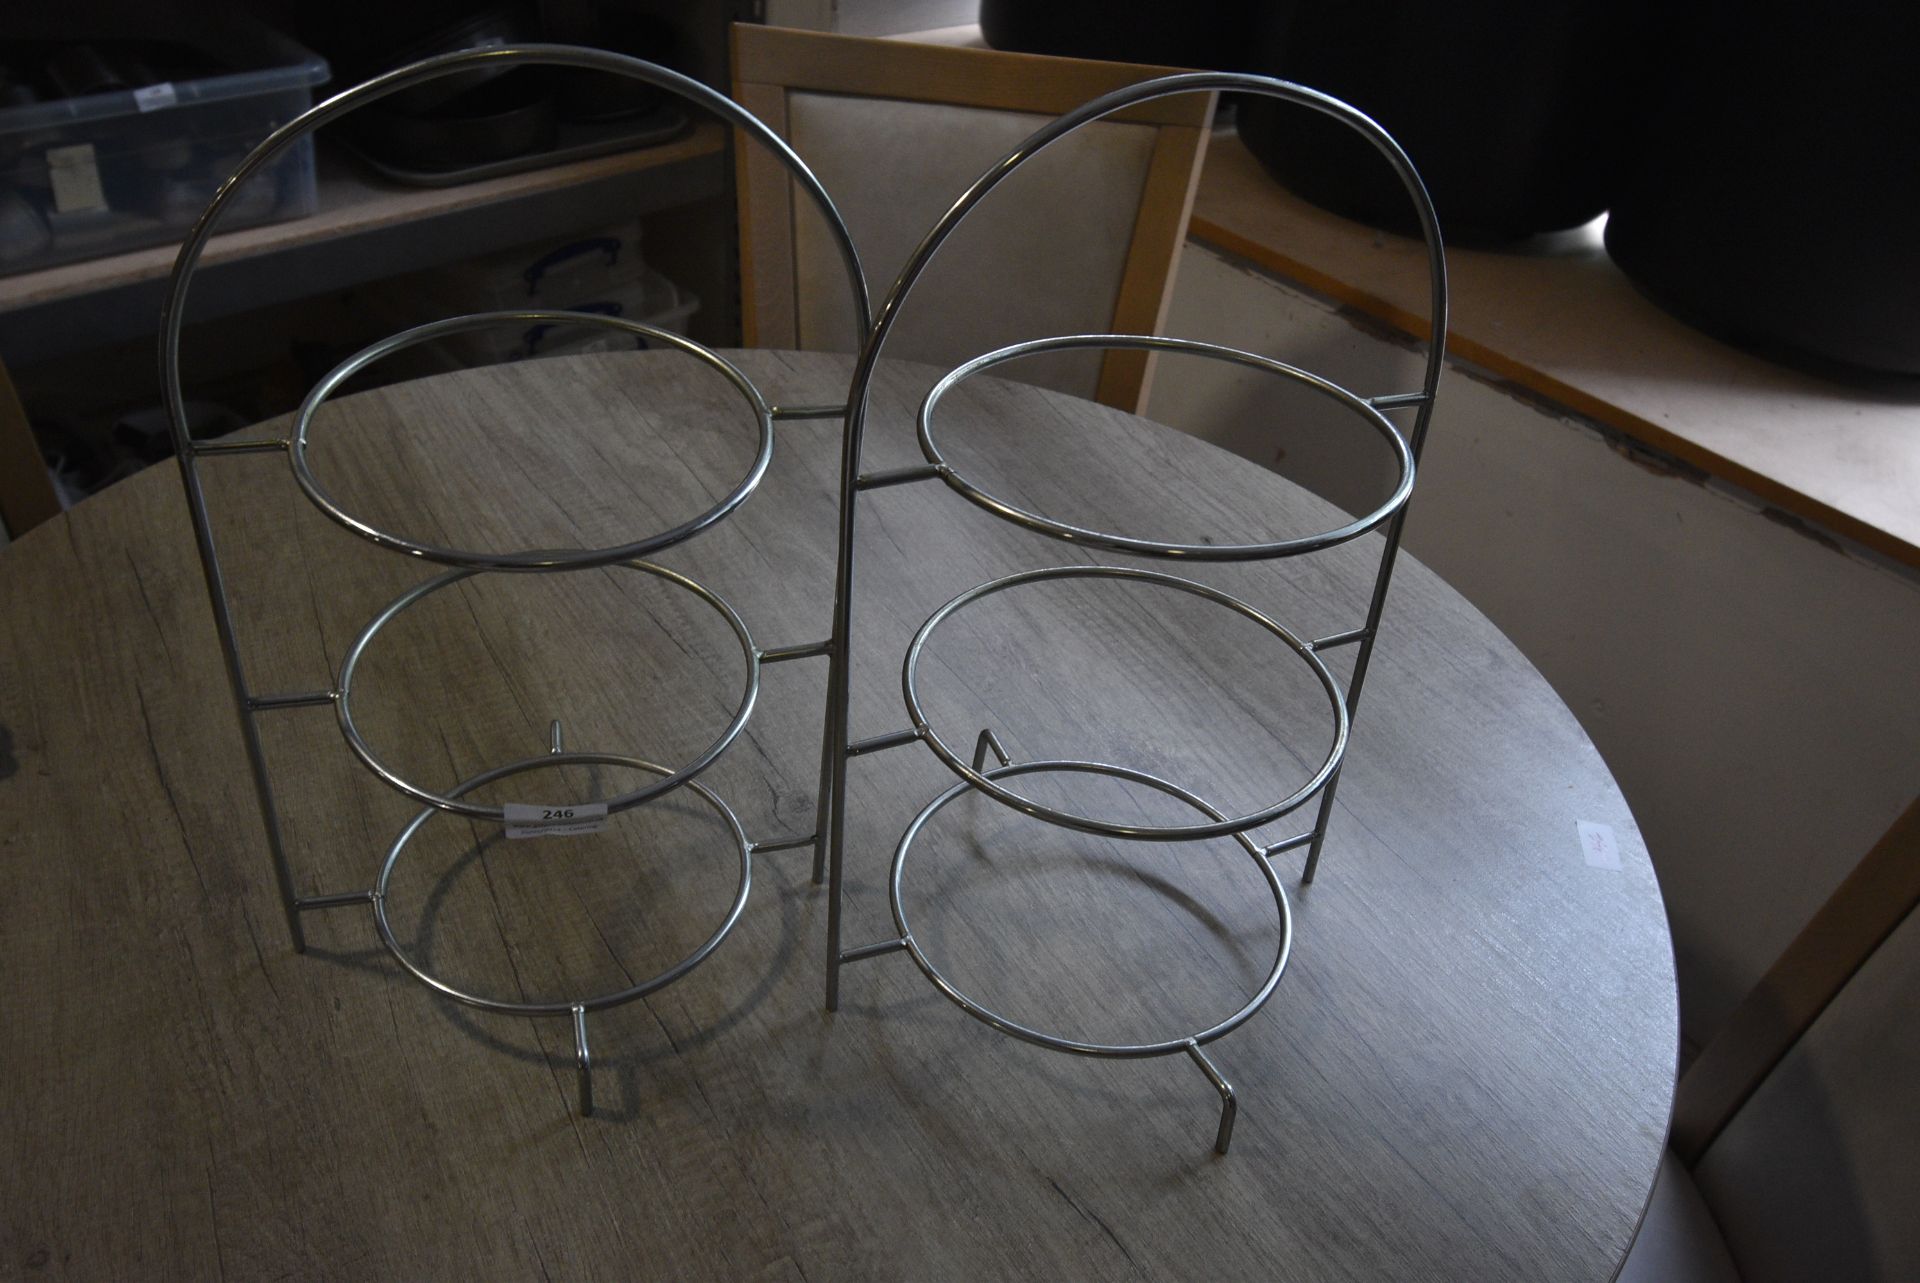 Two Three Tier Cake Plate Stands